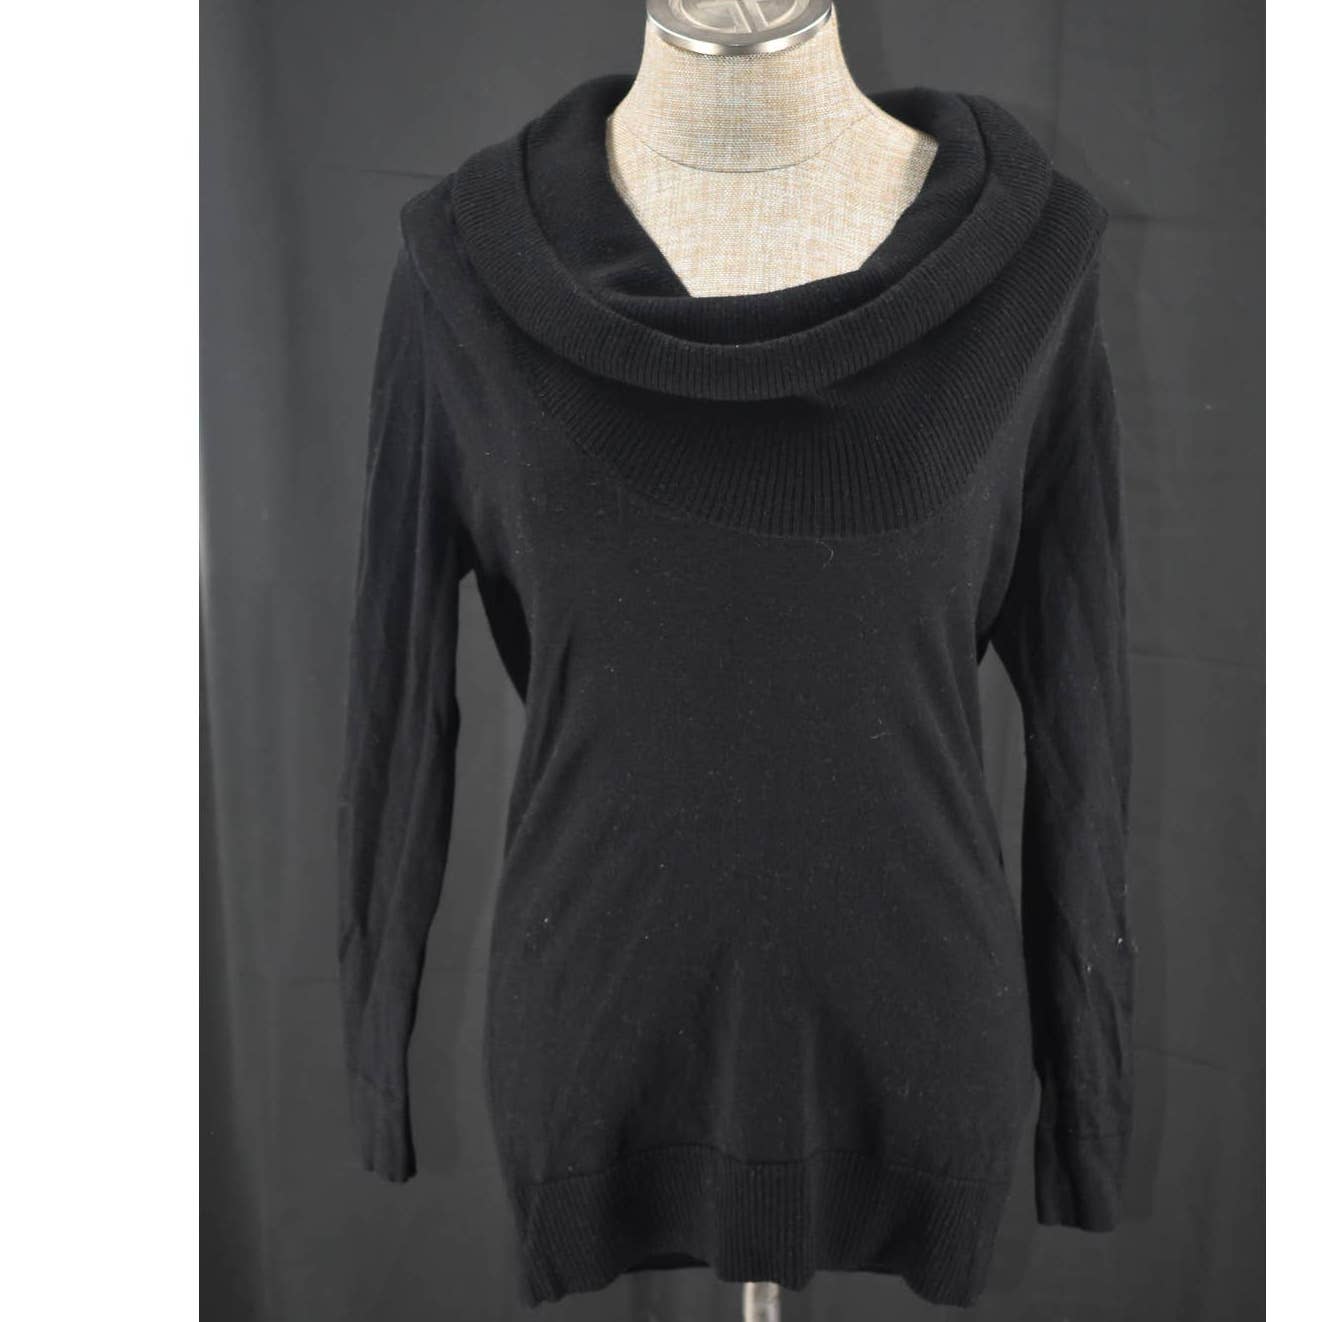 Theory Black Wool Cowl Neck Sweater - S